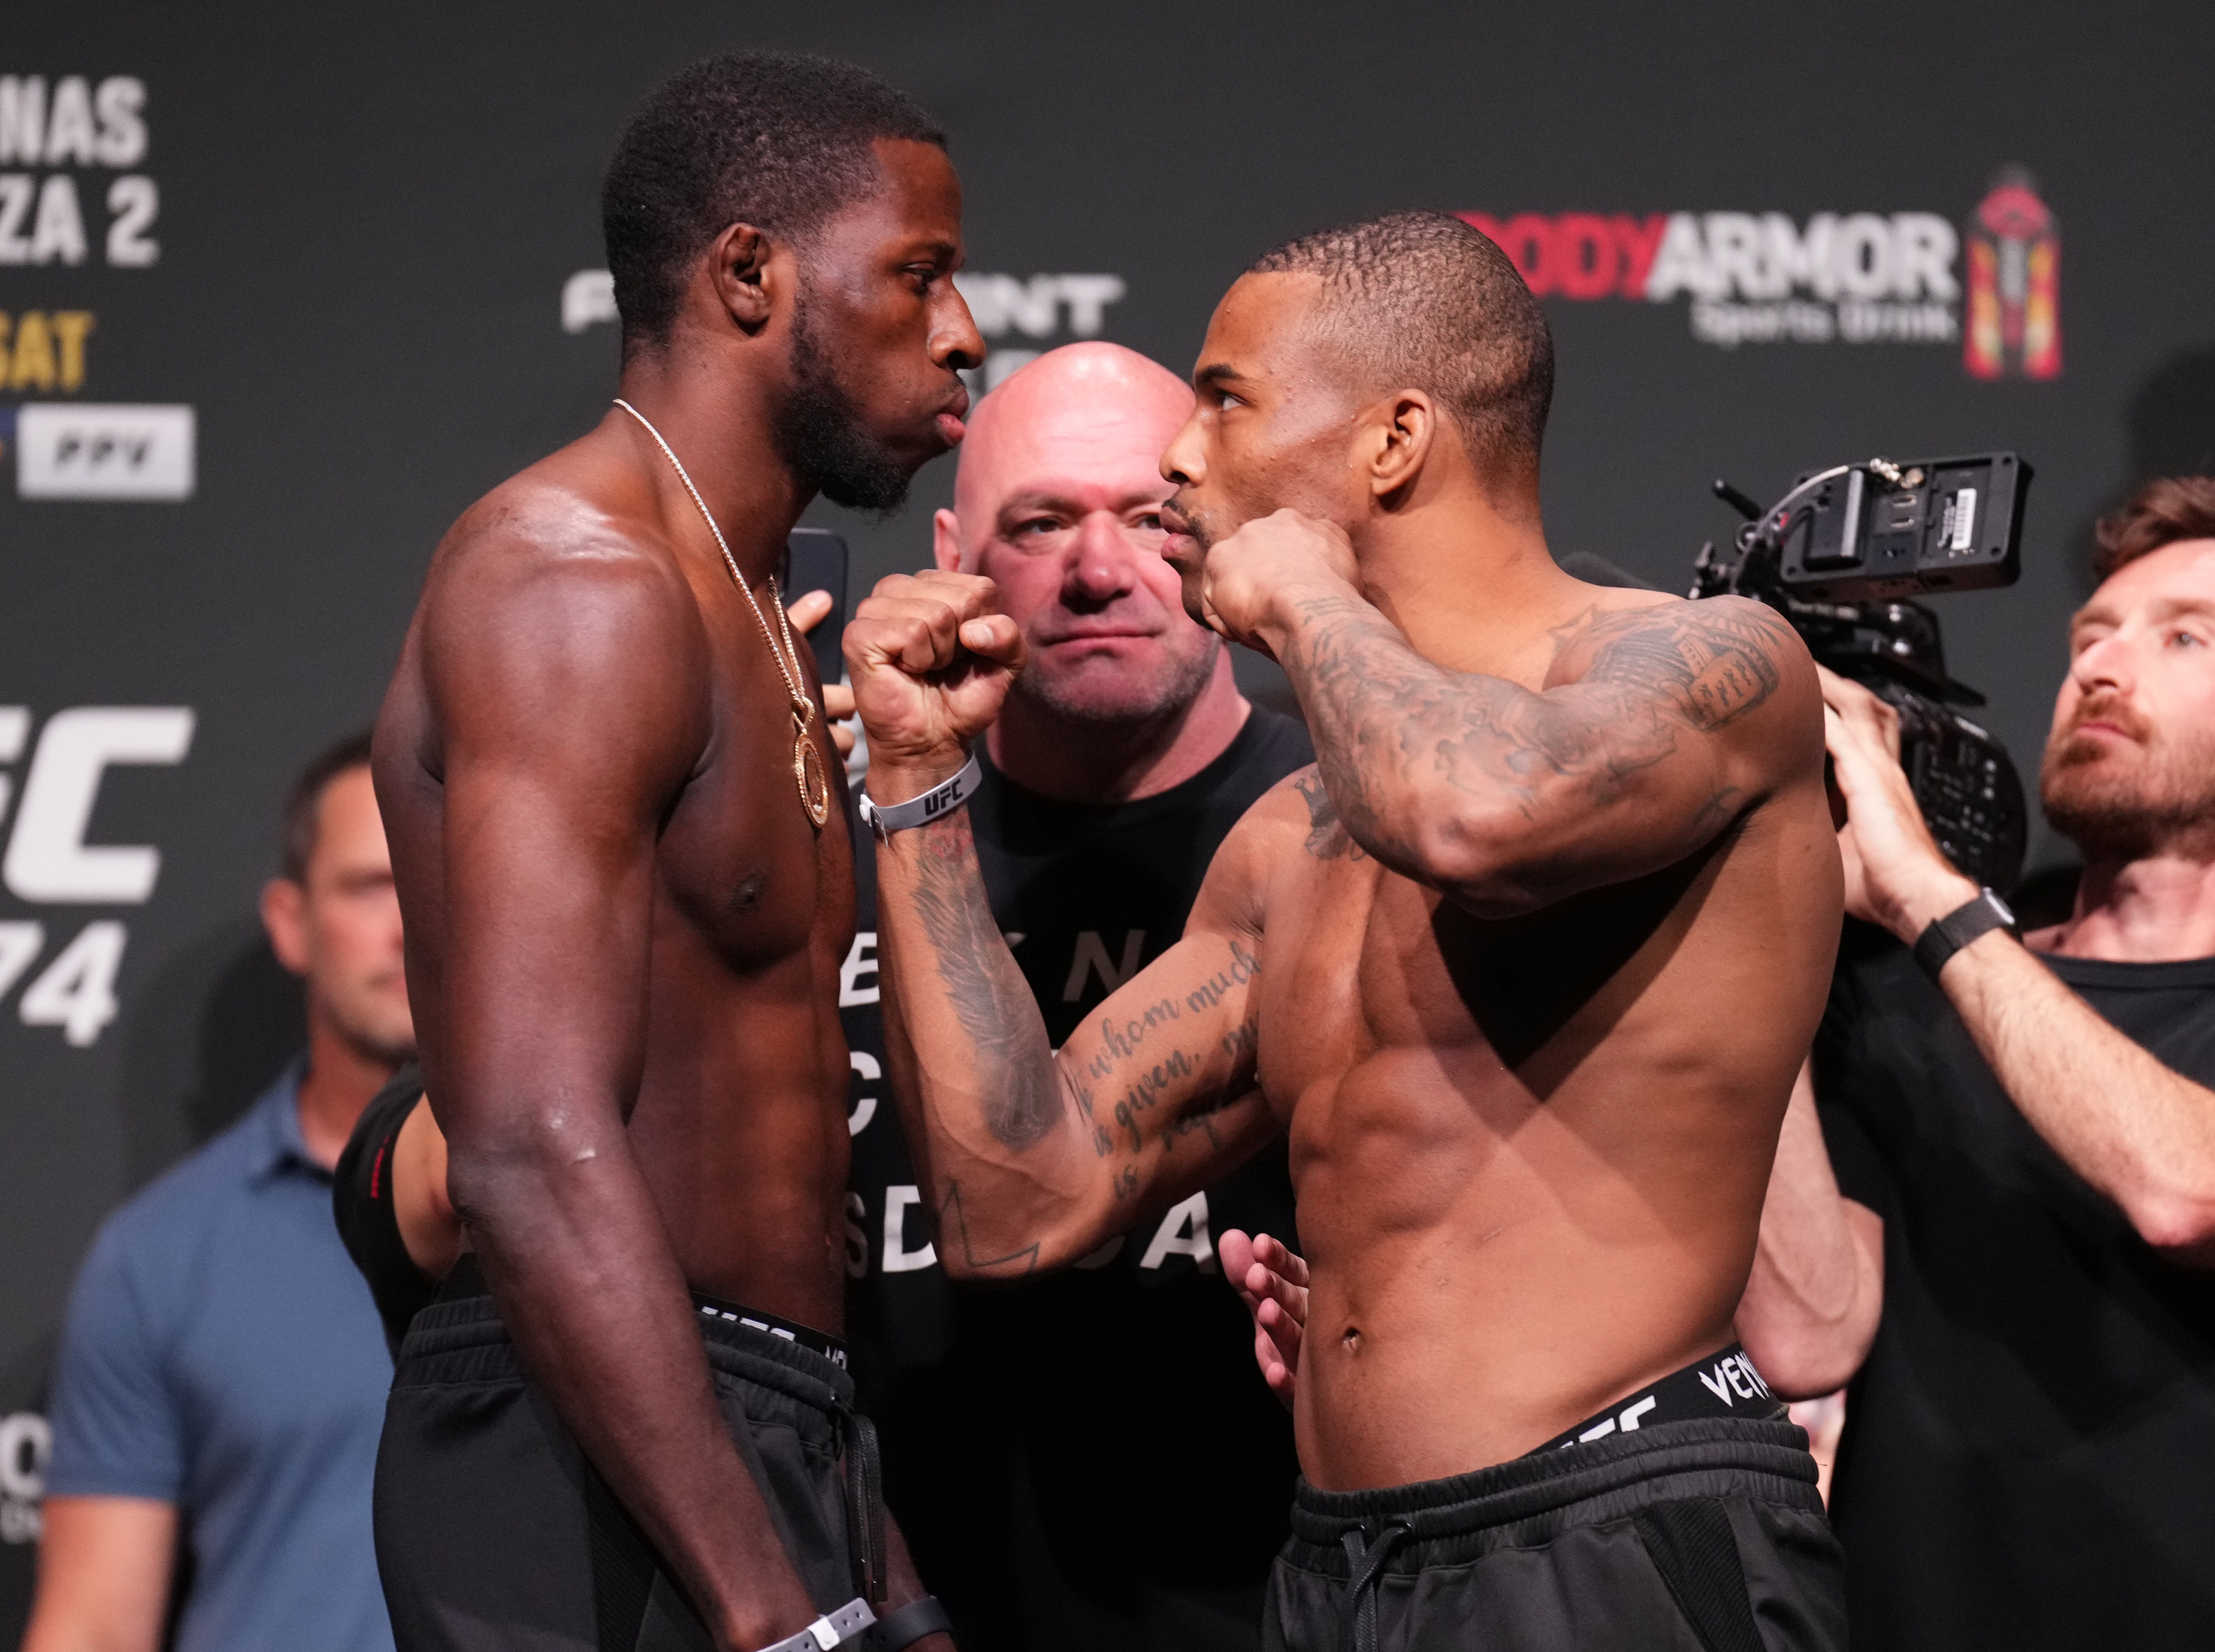 Randy Brown and Khaos Williams face off during the UFC 274 ceremonial weigh-in at the Arizona Federal Theatre on May 06, 2022 in Phoenix, Arizona.